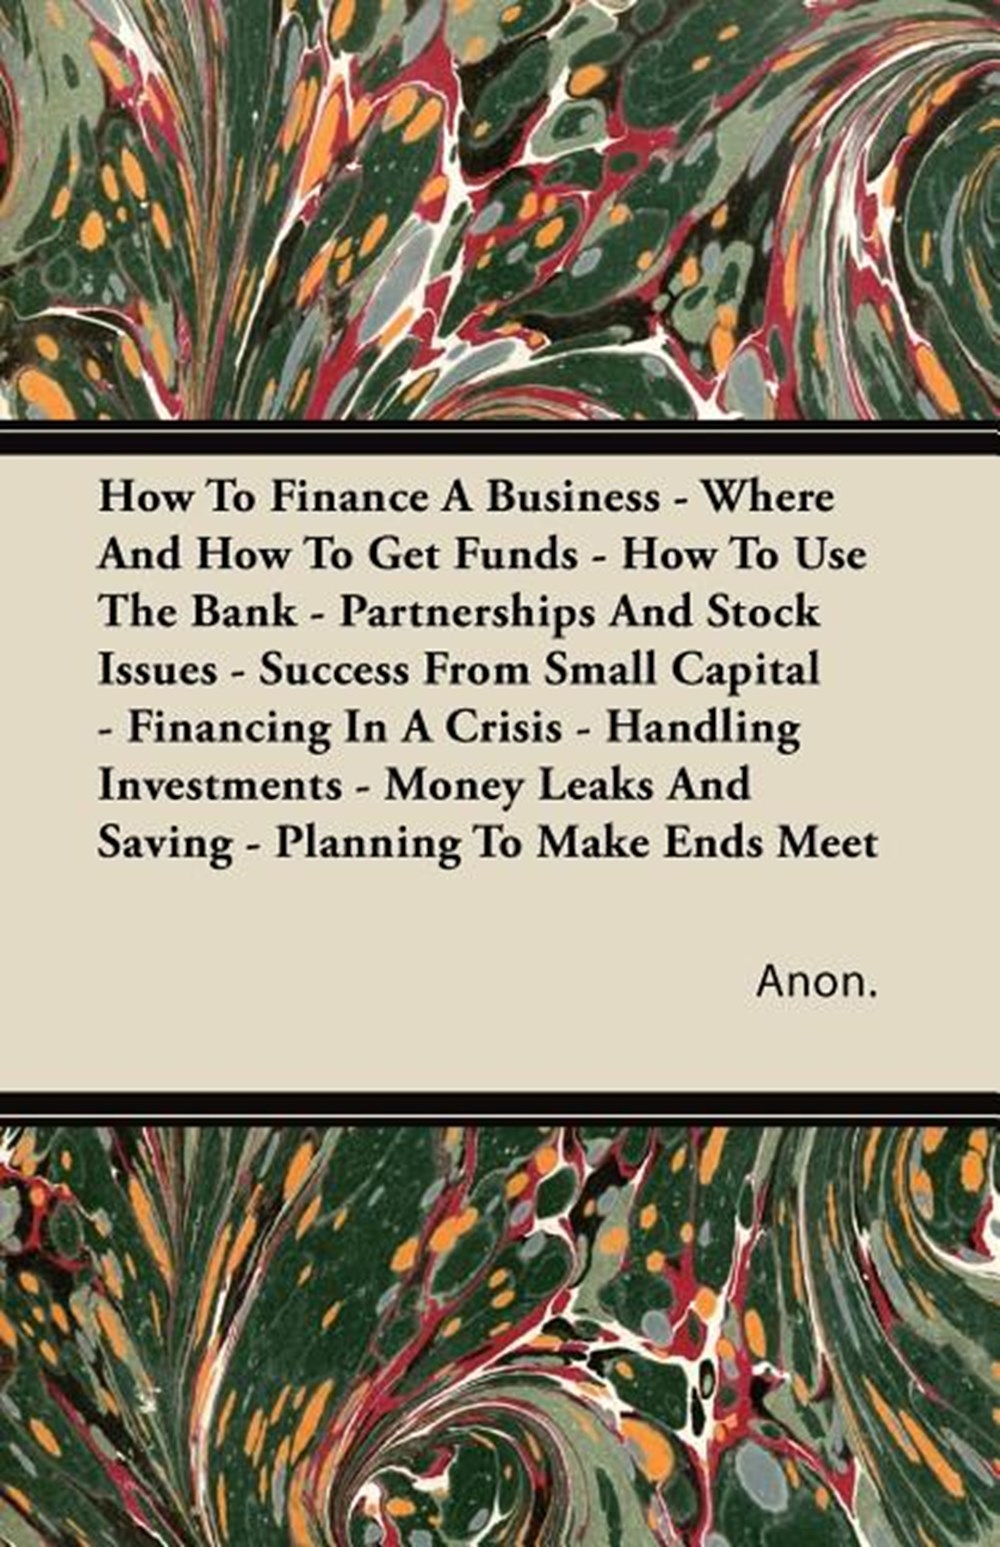 How to Finance a Business - Where and How to Get Funds - How to Use the Bank - Partnerships and Stoc